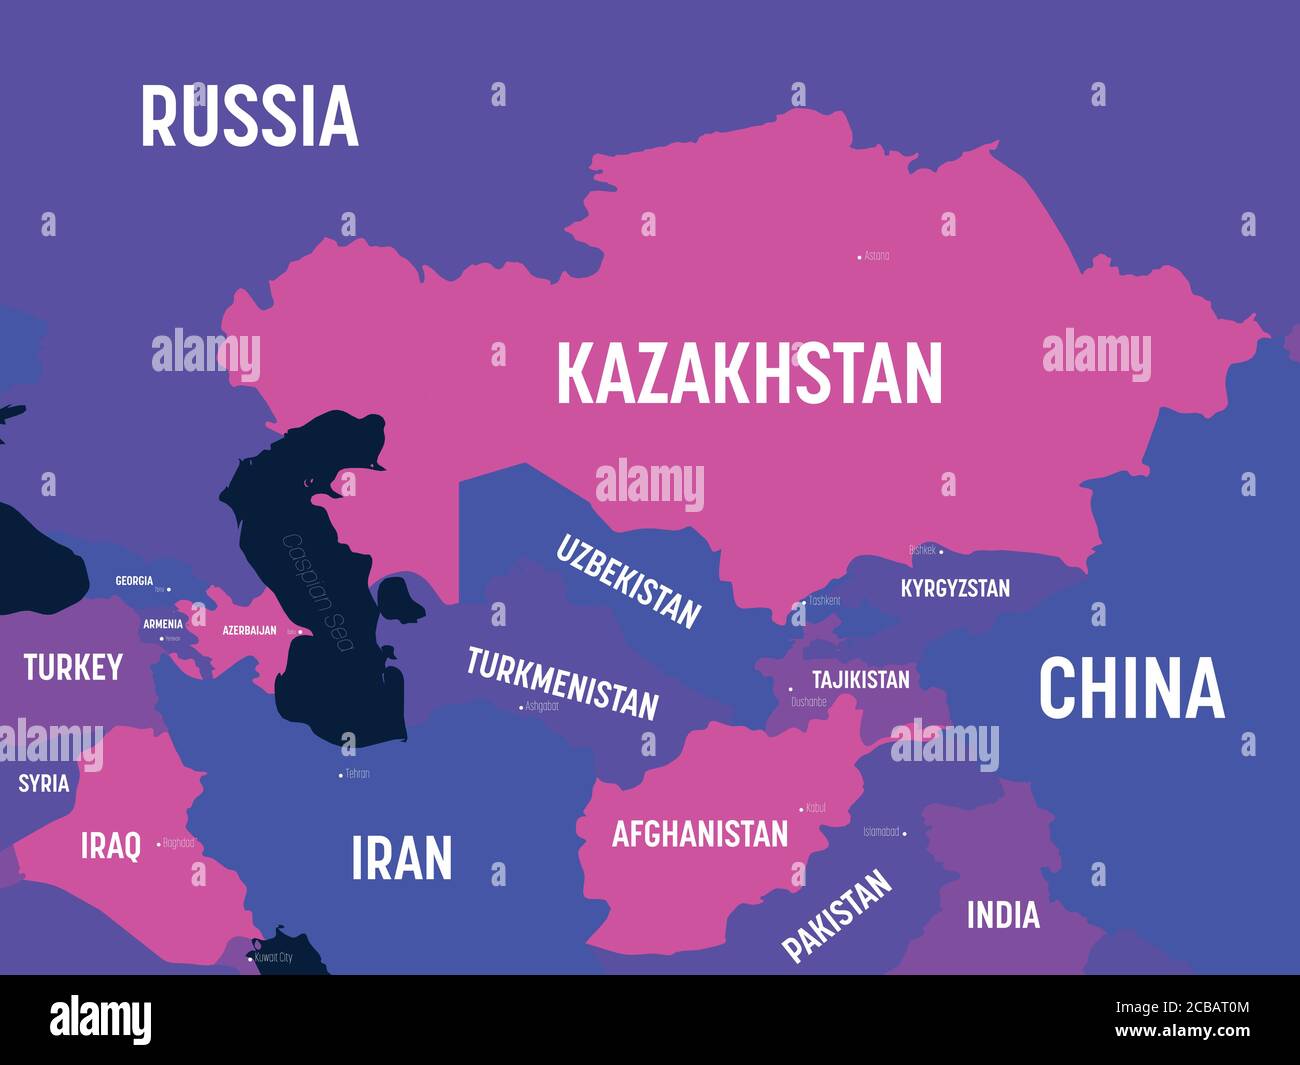 Central Asia Countries And Regions Map 